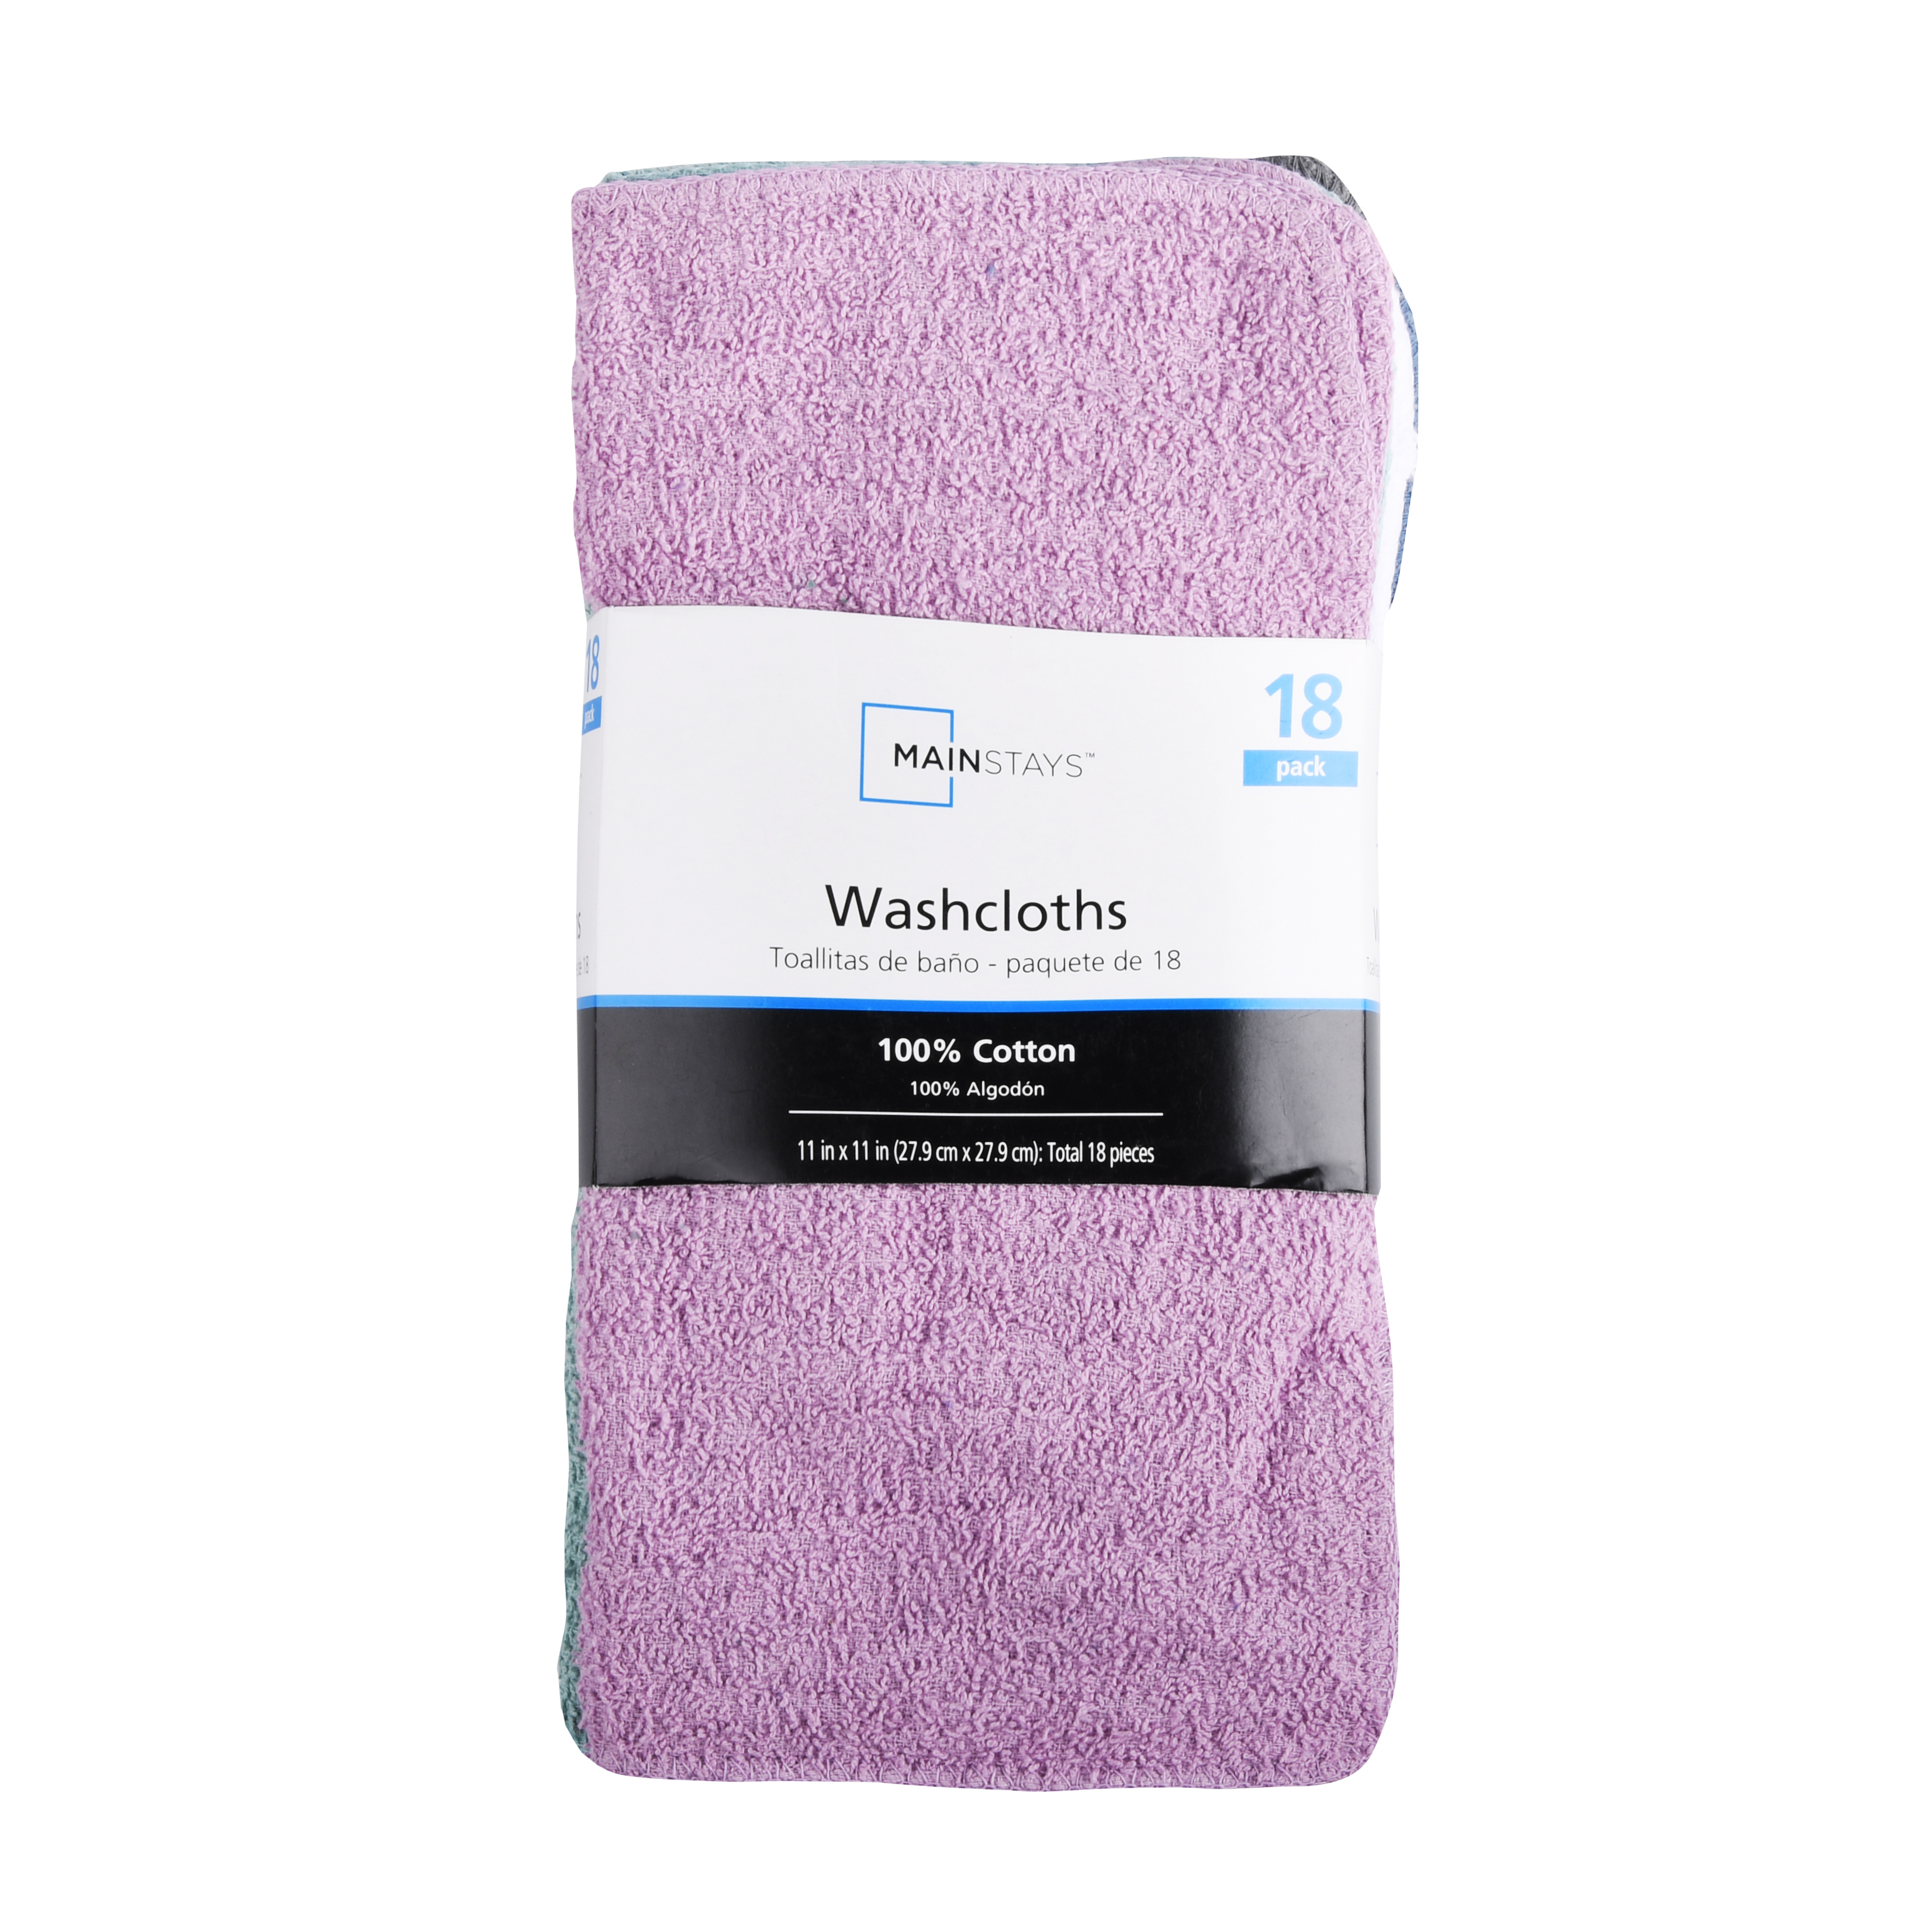 Mainstays Cotton Washcloth Collection, 18-Pack, Pastel - image 1 of 4